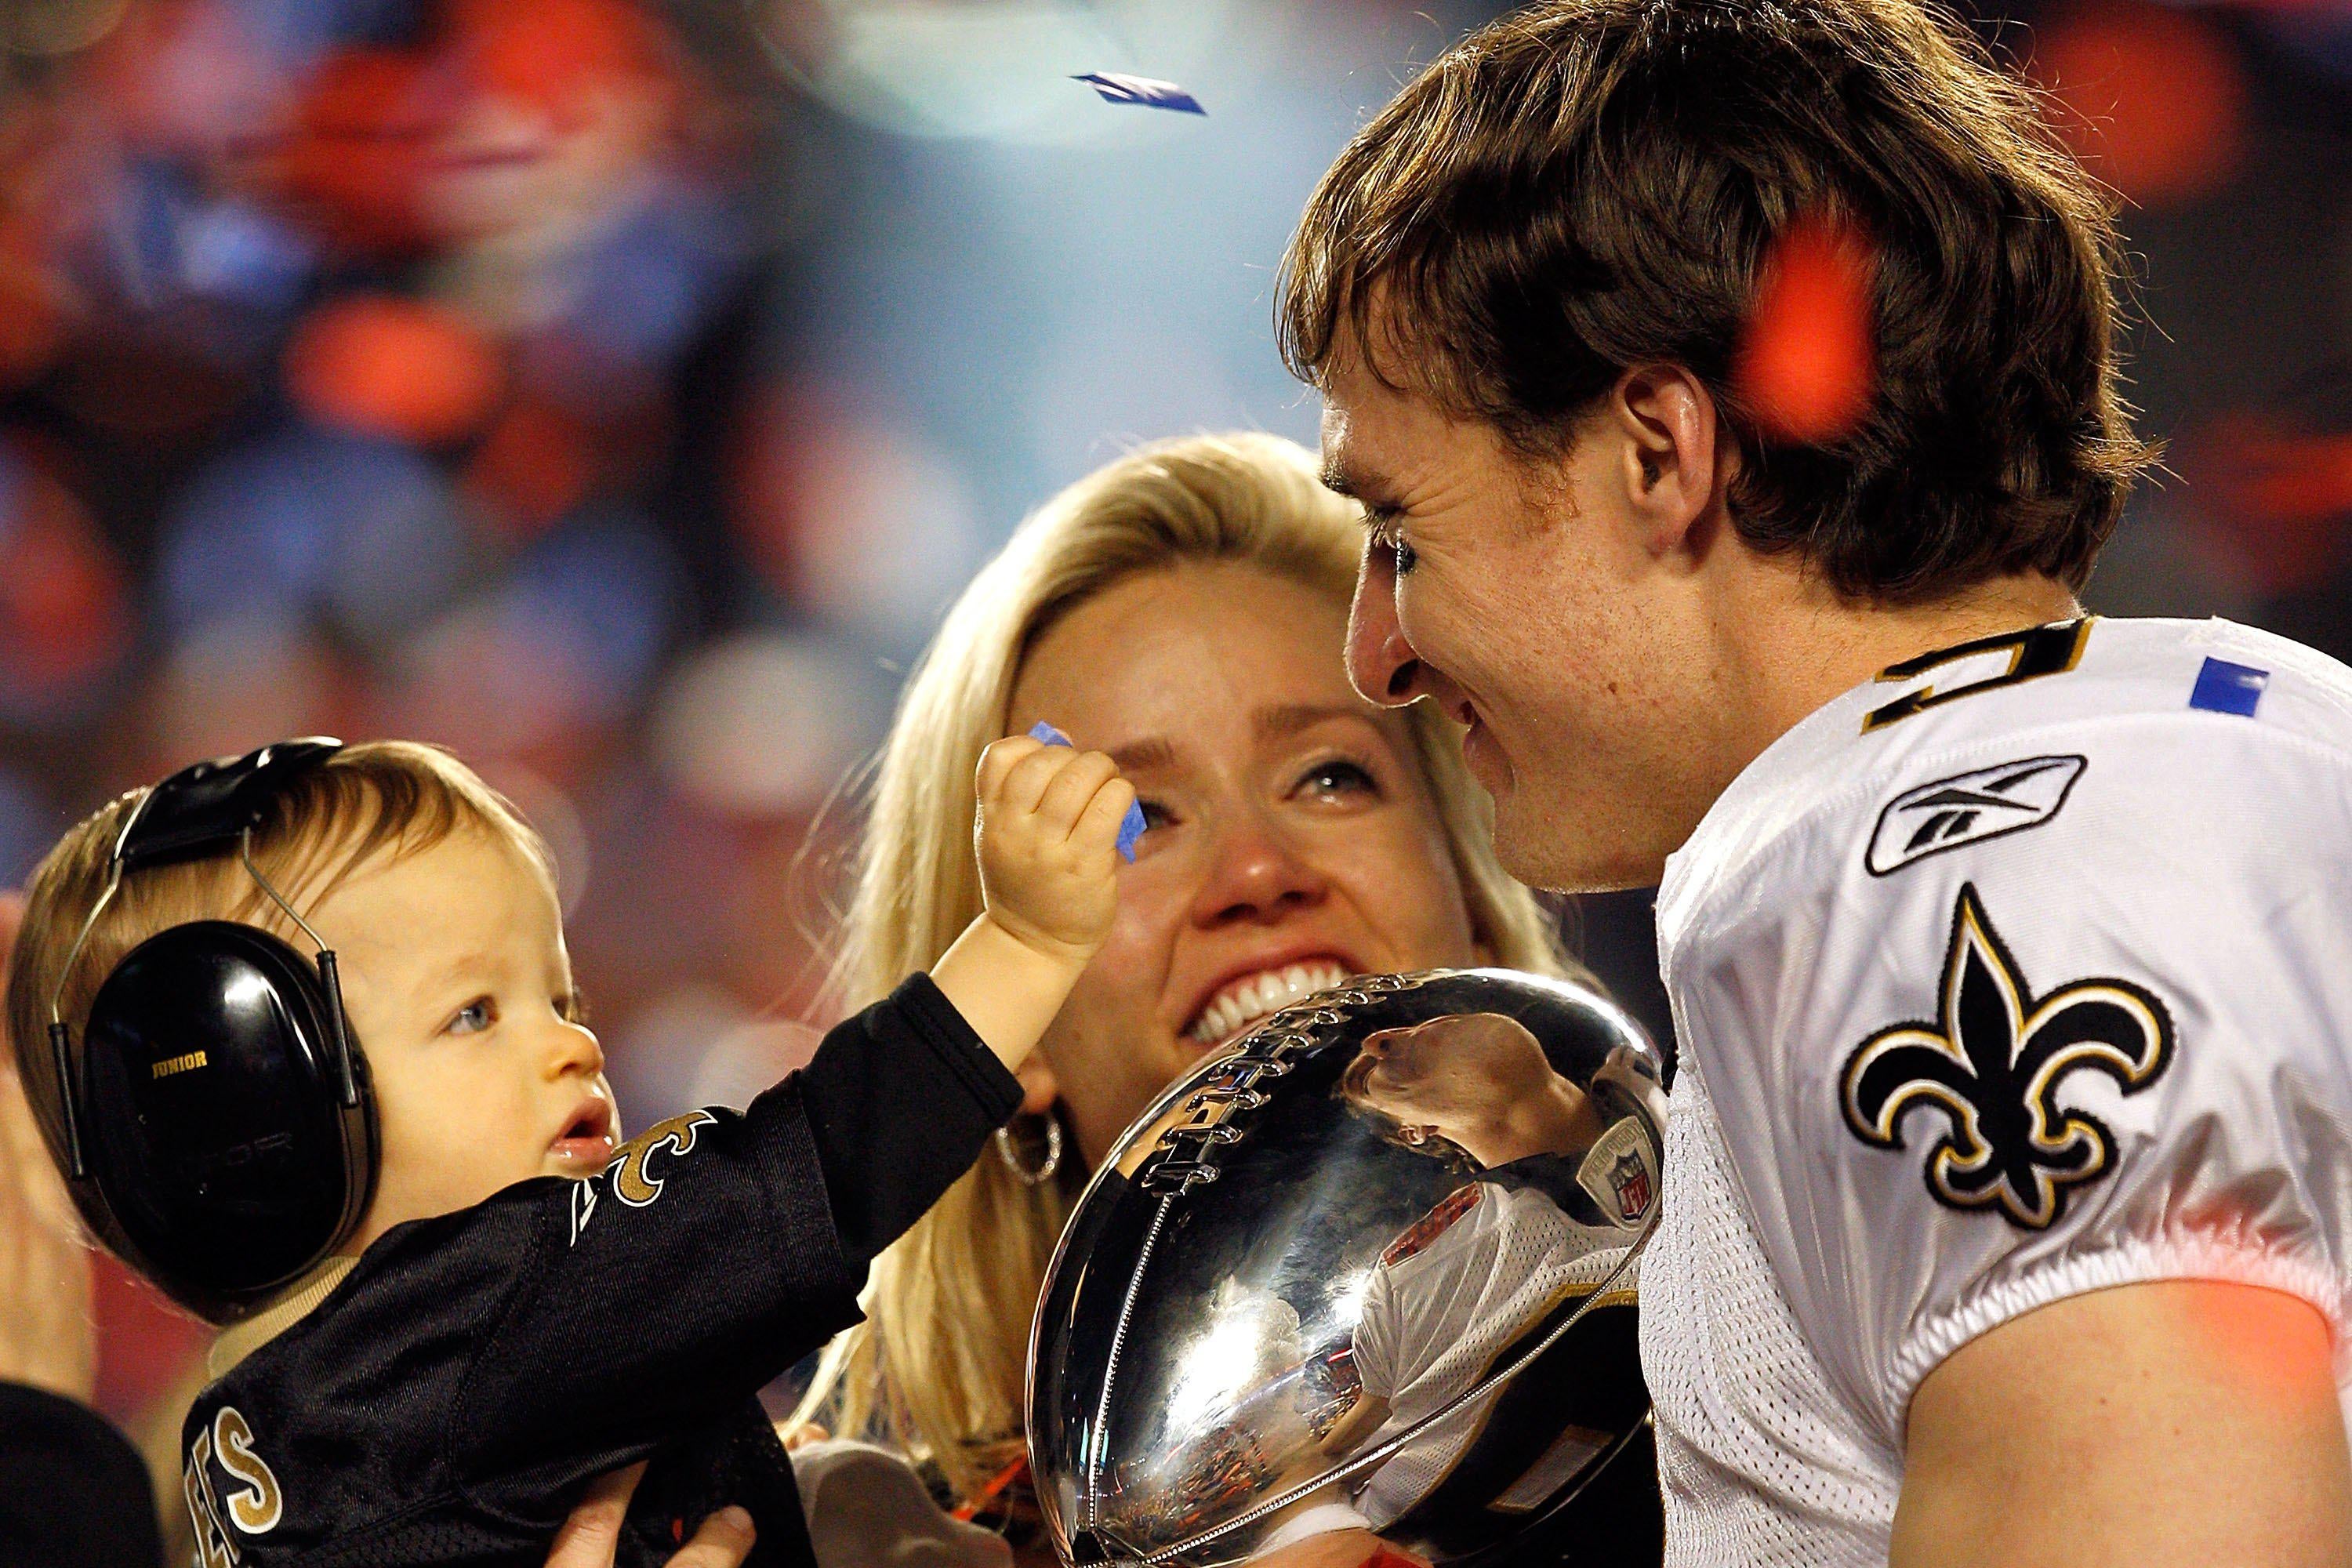 MIAMI GARDENS, FL - FEBRUARY 07:  Drew Brees #9 of the New Orleans Saints celebrates with his son Baylen Brees and wife Brittany Brees after defeating the Indianapolis Colts during Super Bowl XLIV on February 7, 2010 at Sun Life Stadium in Miami Gardens, Florida.  (Photo by Jonathan Daniel/Getty Images)